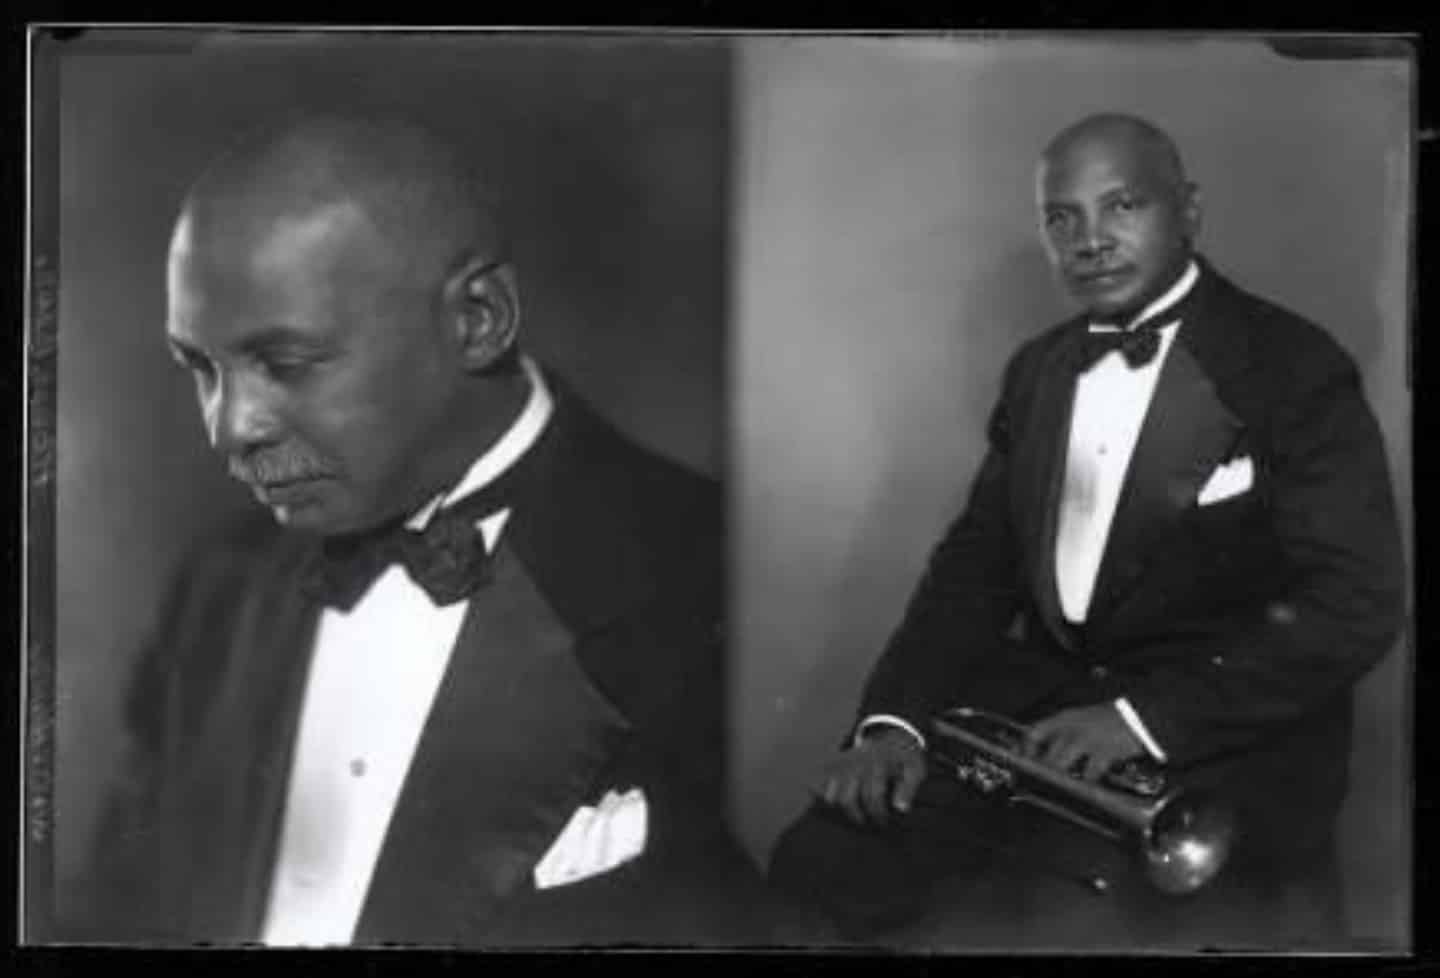 Two black and white photos of a man in a tuxedo, captured with the elegance of black Memphis photography.